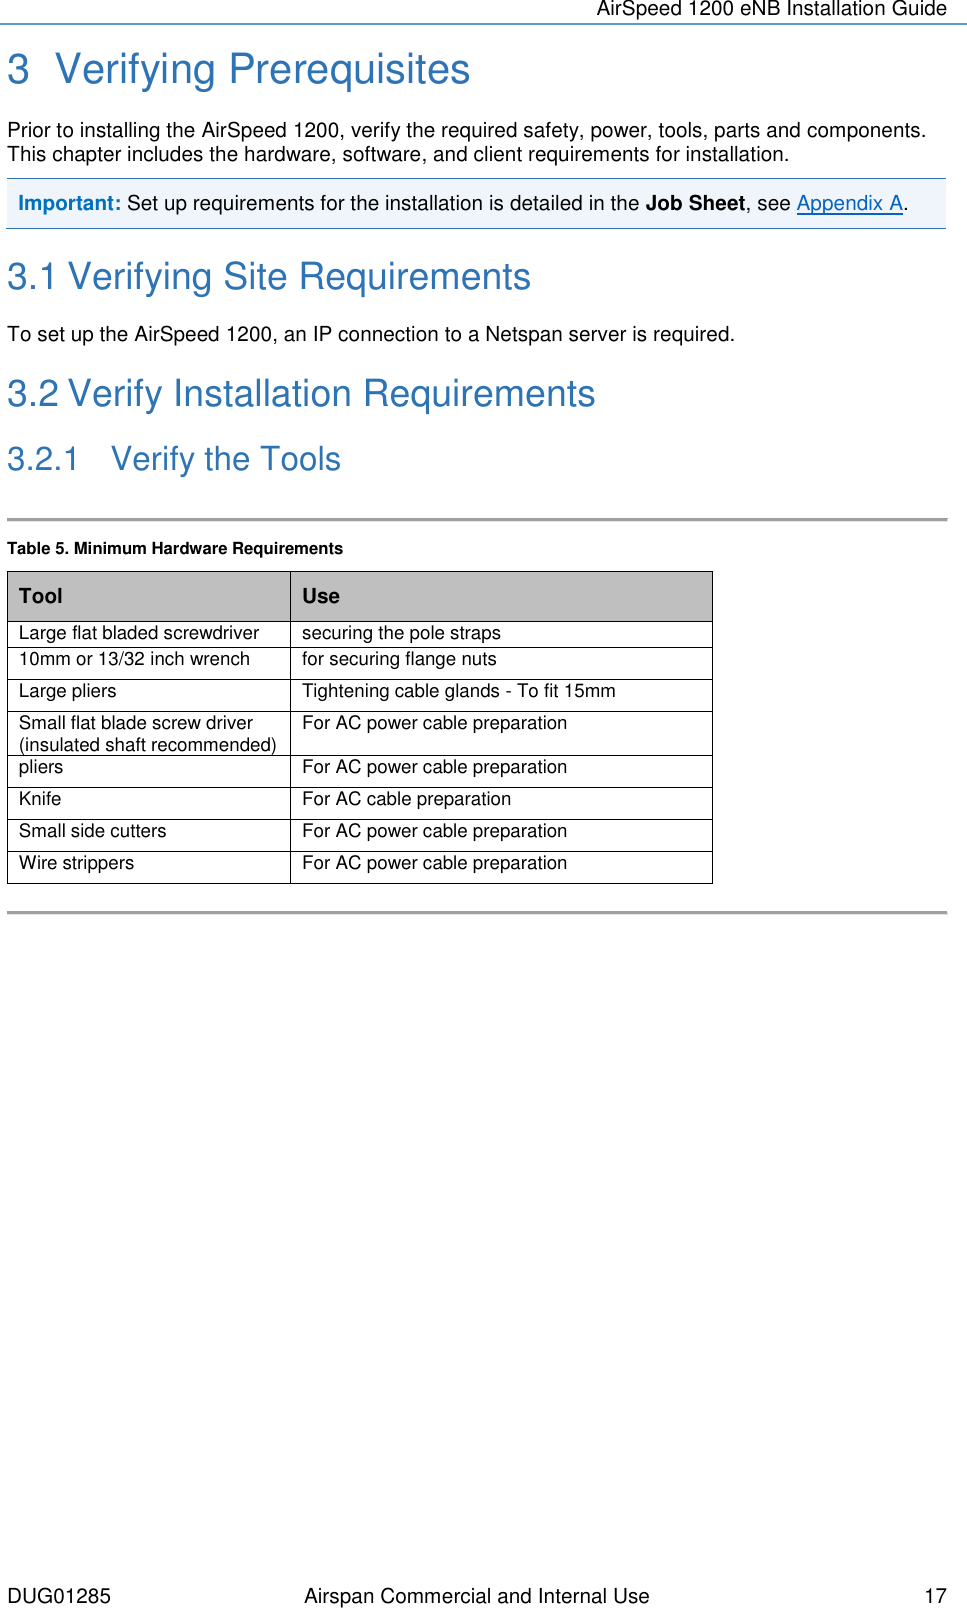 AirSpeed 1200 eNB Installation Guide  DUG01285 Airspan Commercial and Internal Use  17 3  Verifying Prerequisites Prior to installing the AirSpeed 1200, verify the required safety, power, tools, parts and components. This chapter includes the hardware, software, and client requirements for installation. Important: Set up requirements for the installation is detailed in the Job Sheet, see Appendix A.  3.1 Verifying Site Requirements To set up the AirSpeed 1200, an IP connection to a Netspan server is required. 3.2 Verify Installation Requirements 3.2.1  Verify the Tools  Table 5. Minimum Hardware Requirements Tool Use Large flat bladed screwdriver  securing the pole straps 10mm or 13/32 inch wrench  for securing flange nuts Large pliers  Tightening cable glands - To fit 15mm Small flat blade screw driver (insulated shaft recommended) For AC power cable preparation pliers  For AC power cable preparation Knife For AC cable preparation Small side cutters For AC power cable preparation Wire strippers For AC power cable preparation      